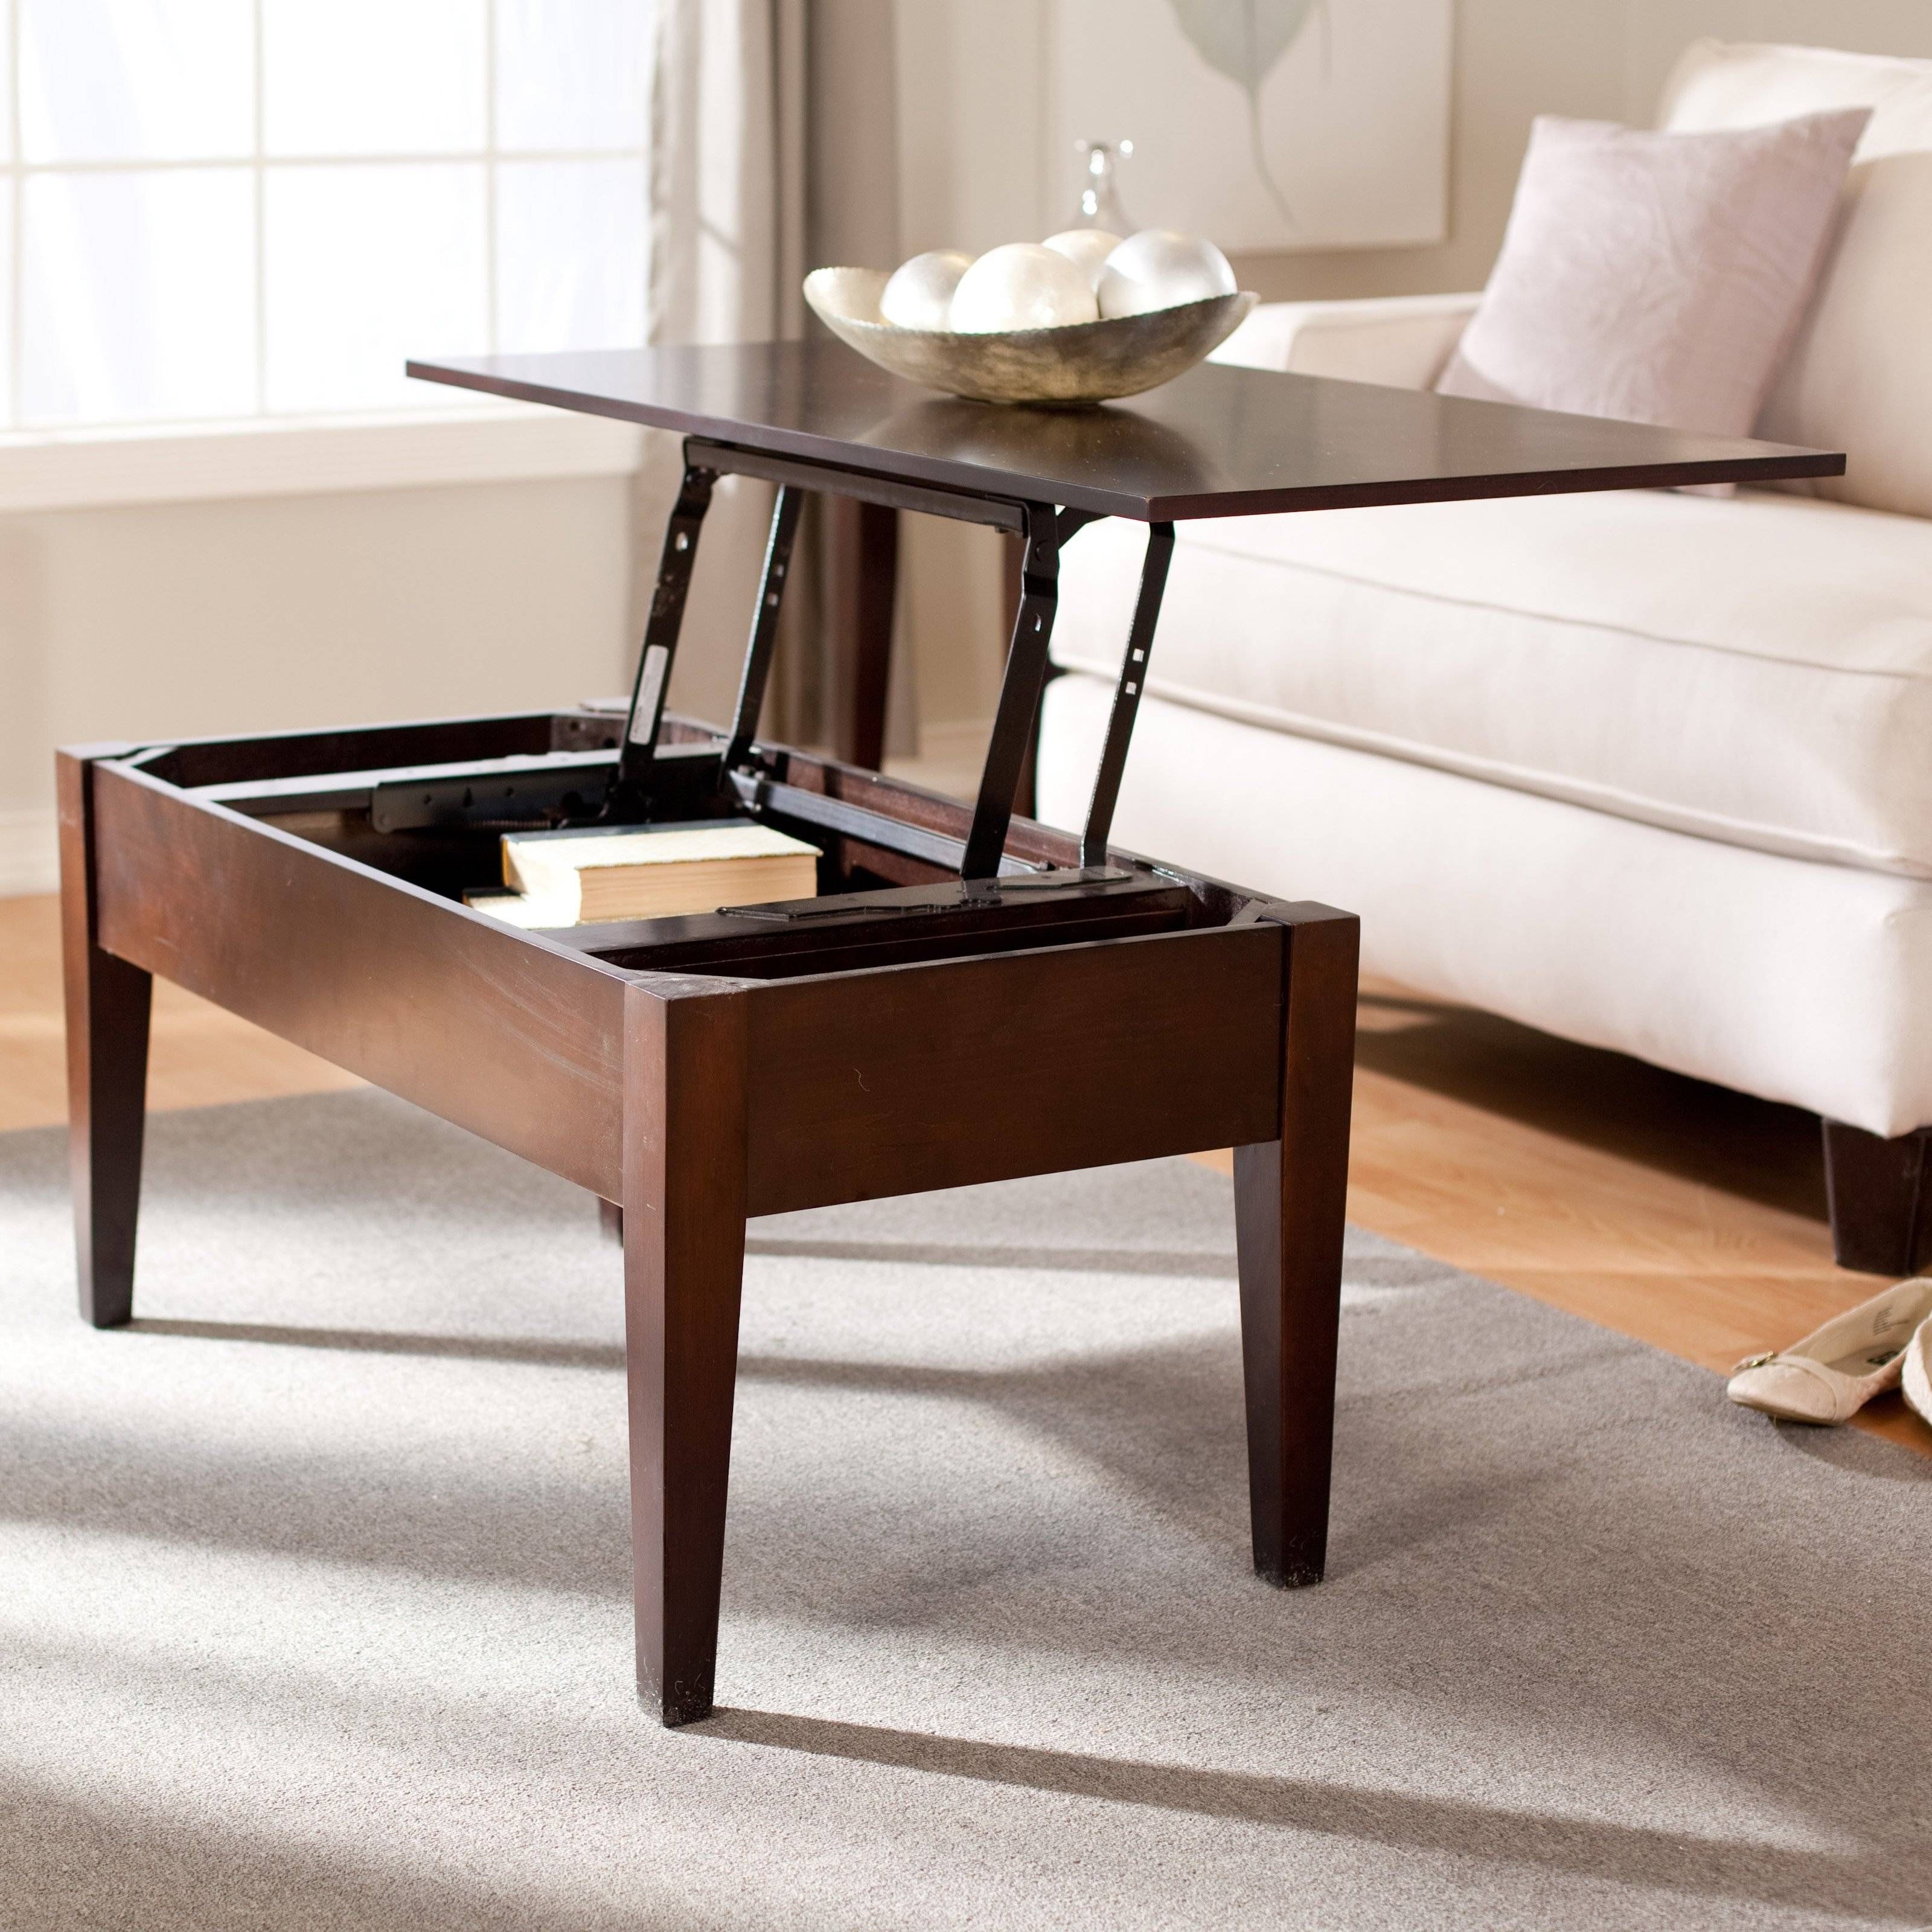 Turner Lift Top Coffee Table – Espresso | Hayneedle Throughout Coffee Tables Top Lifts Up (View 2 of 30)